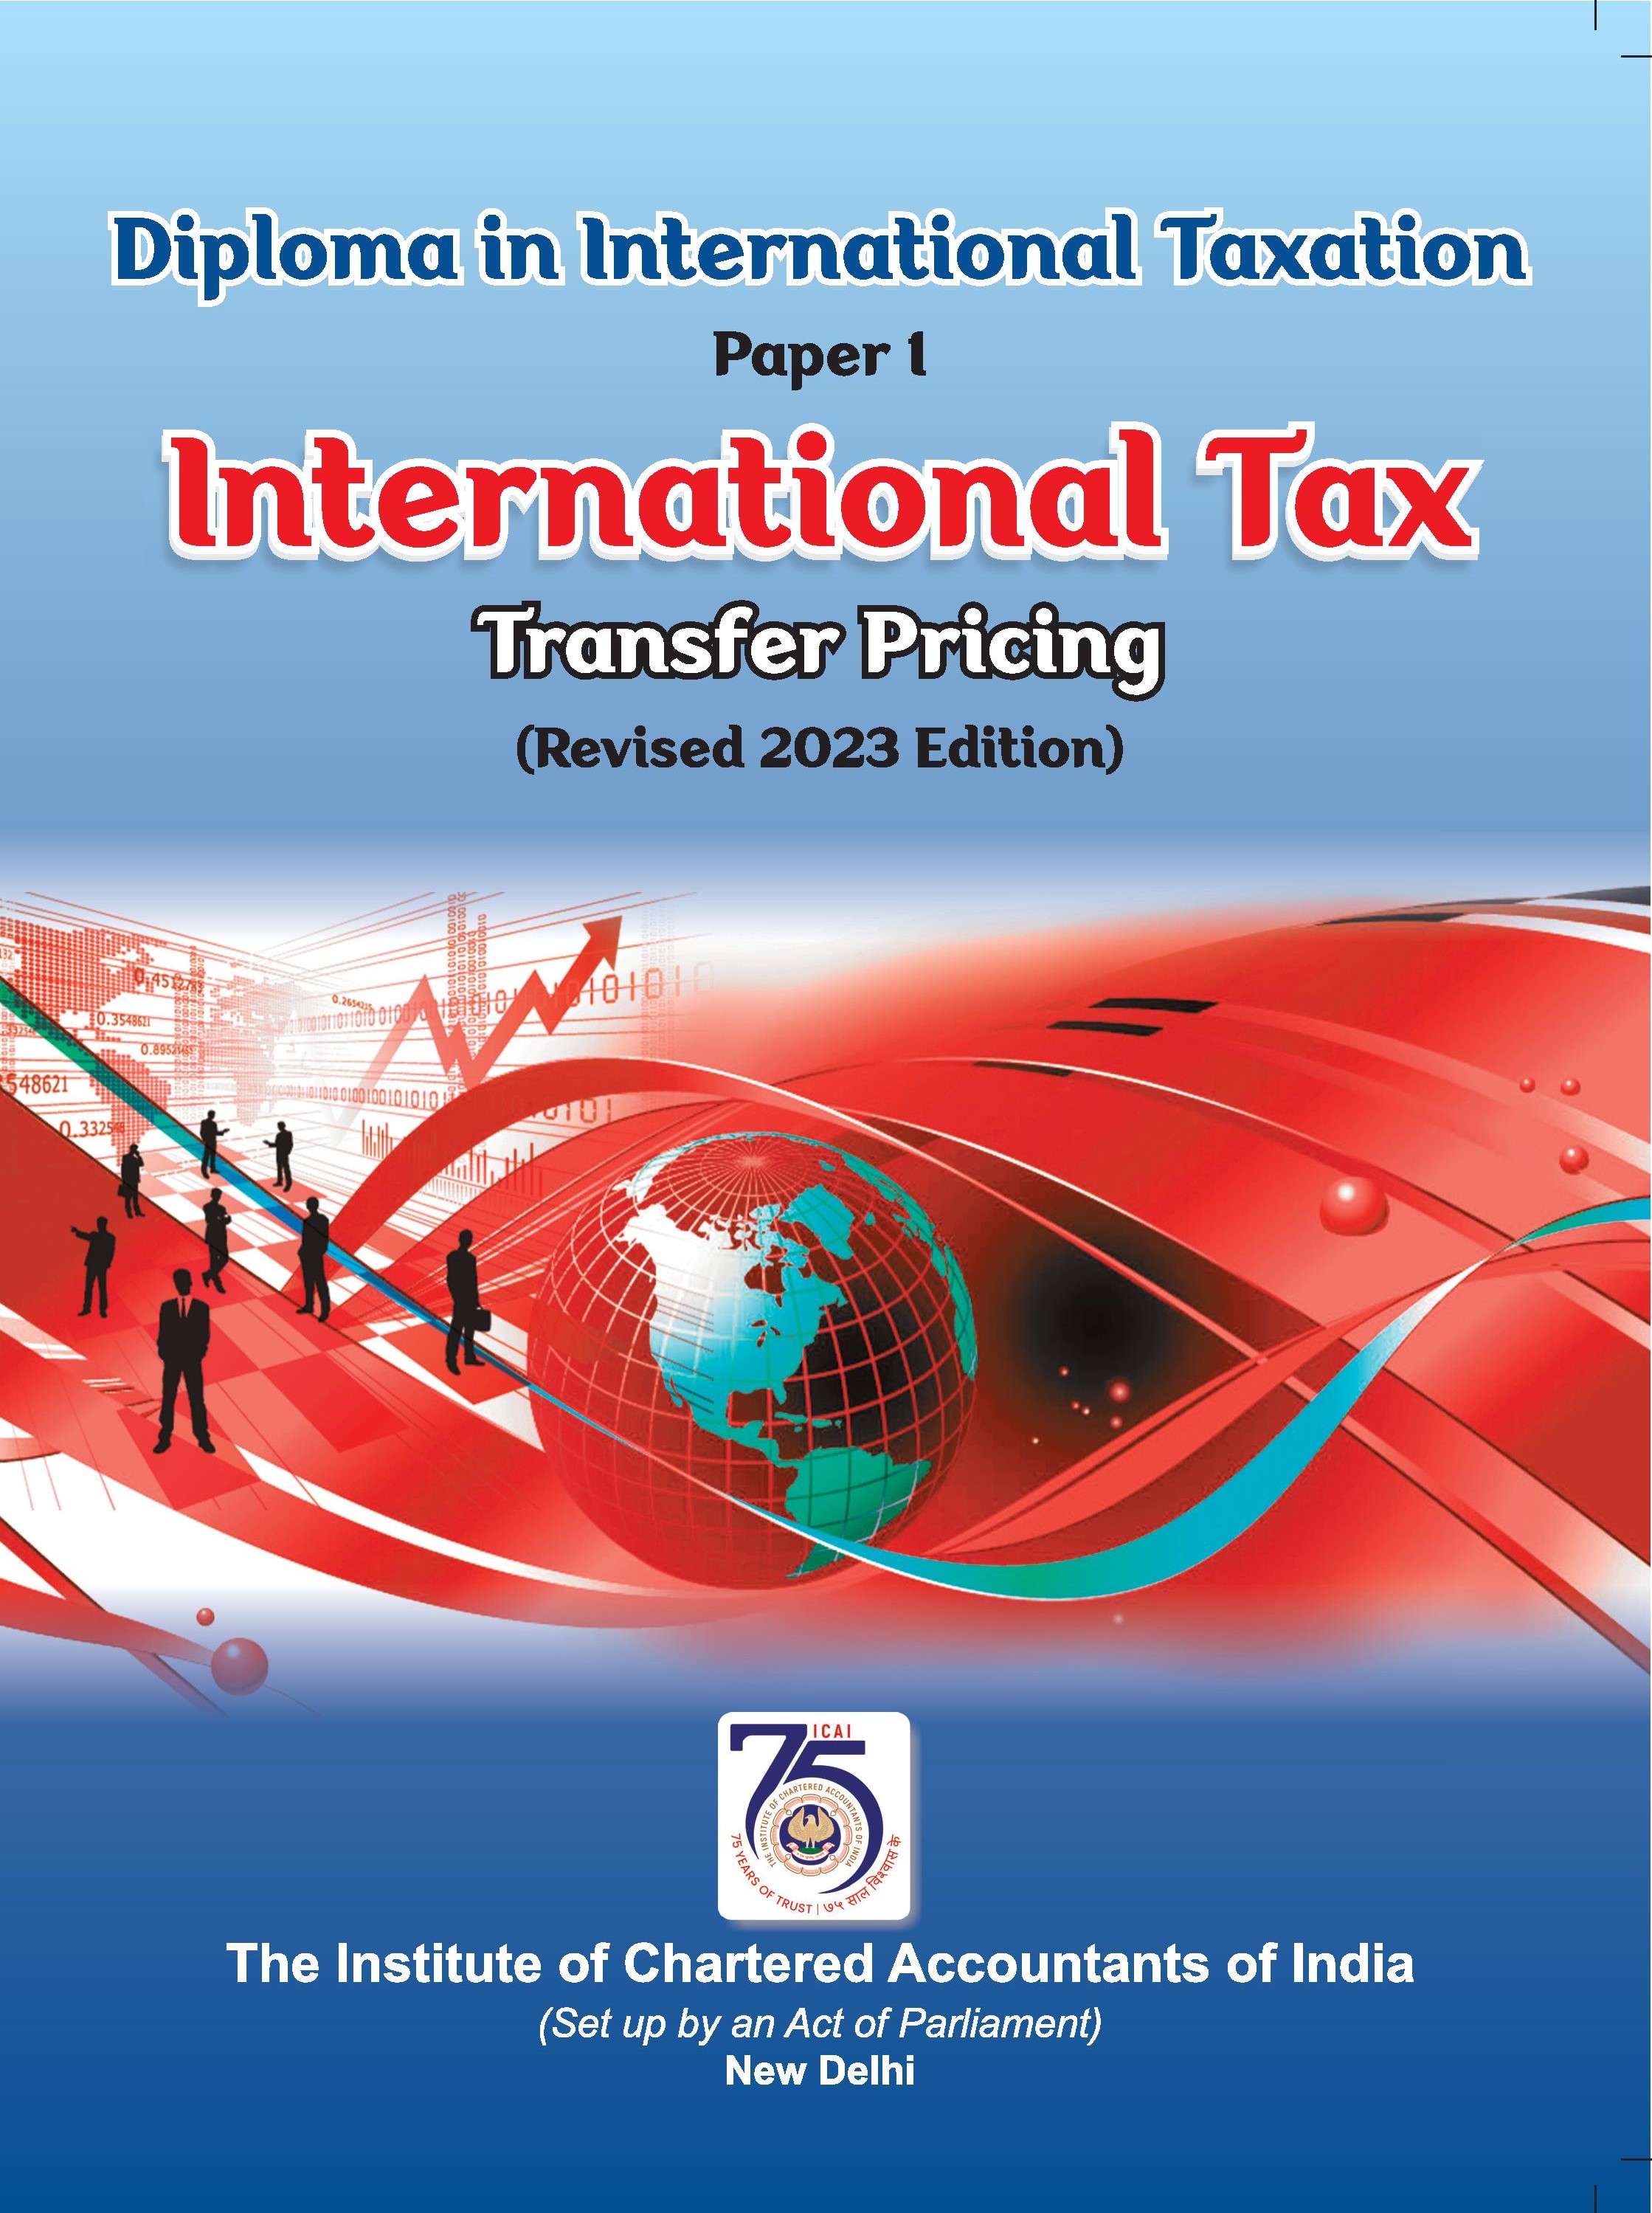 Diploma in International Taxation - Paper - 1 & Paper 2 (Transfer Pricing and Practice) (Part - I & II) 8th Edition Revised 2023